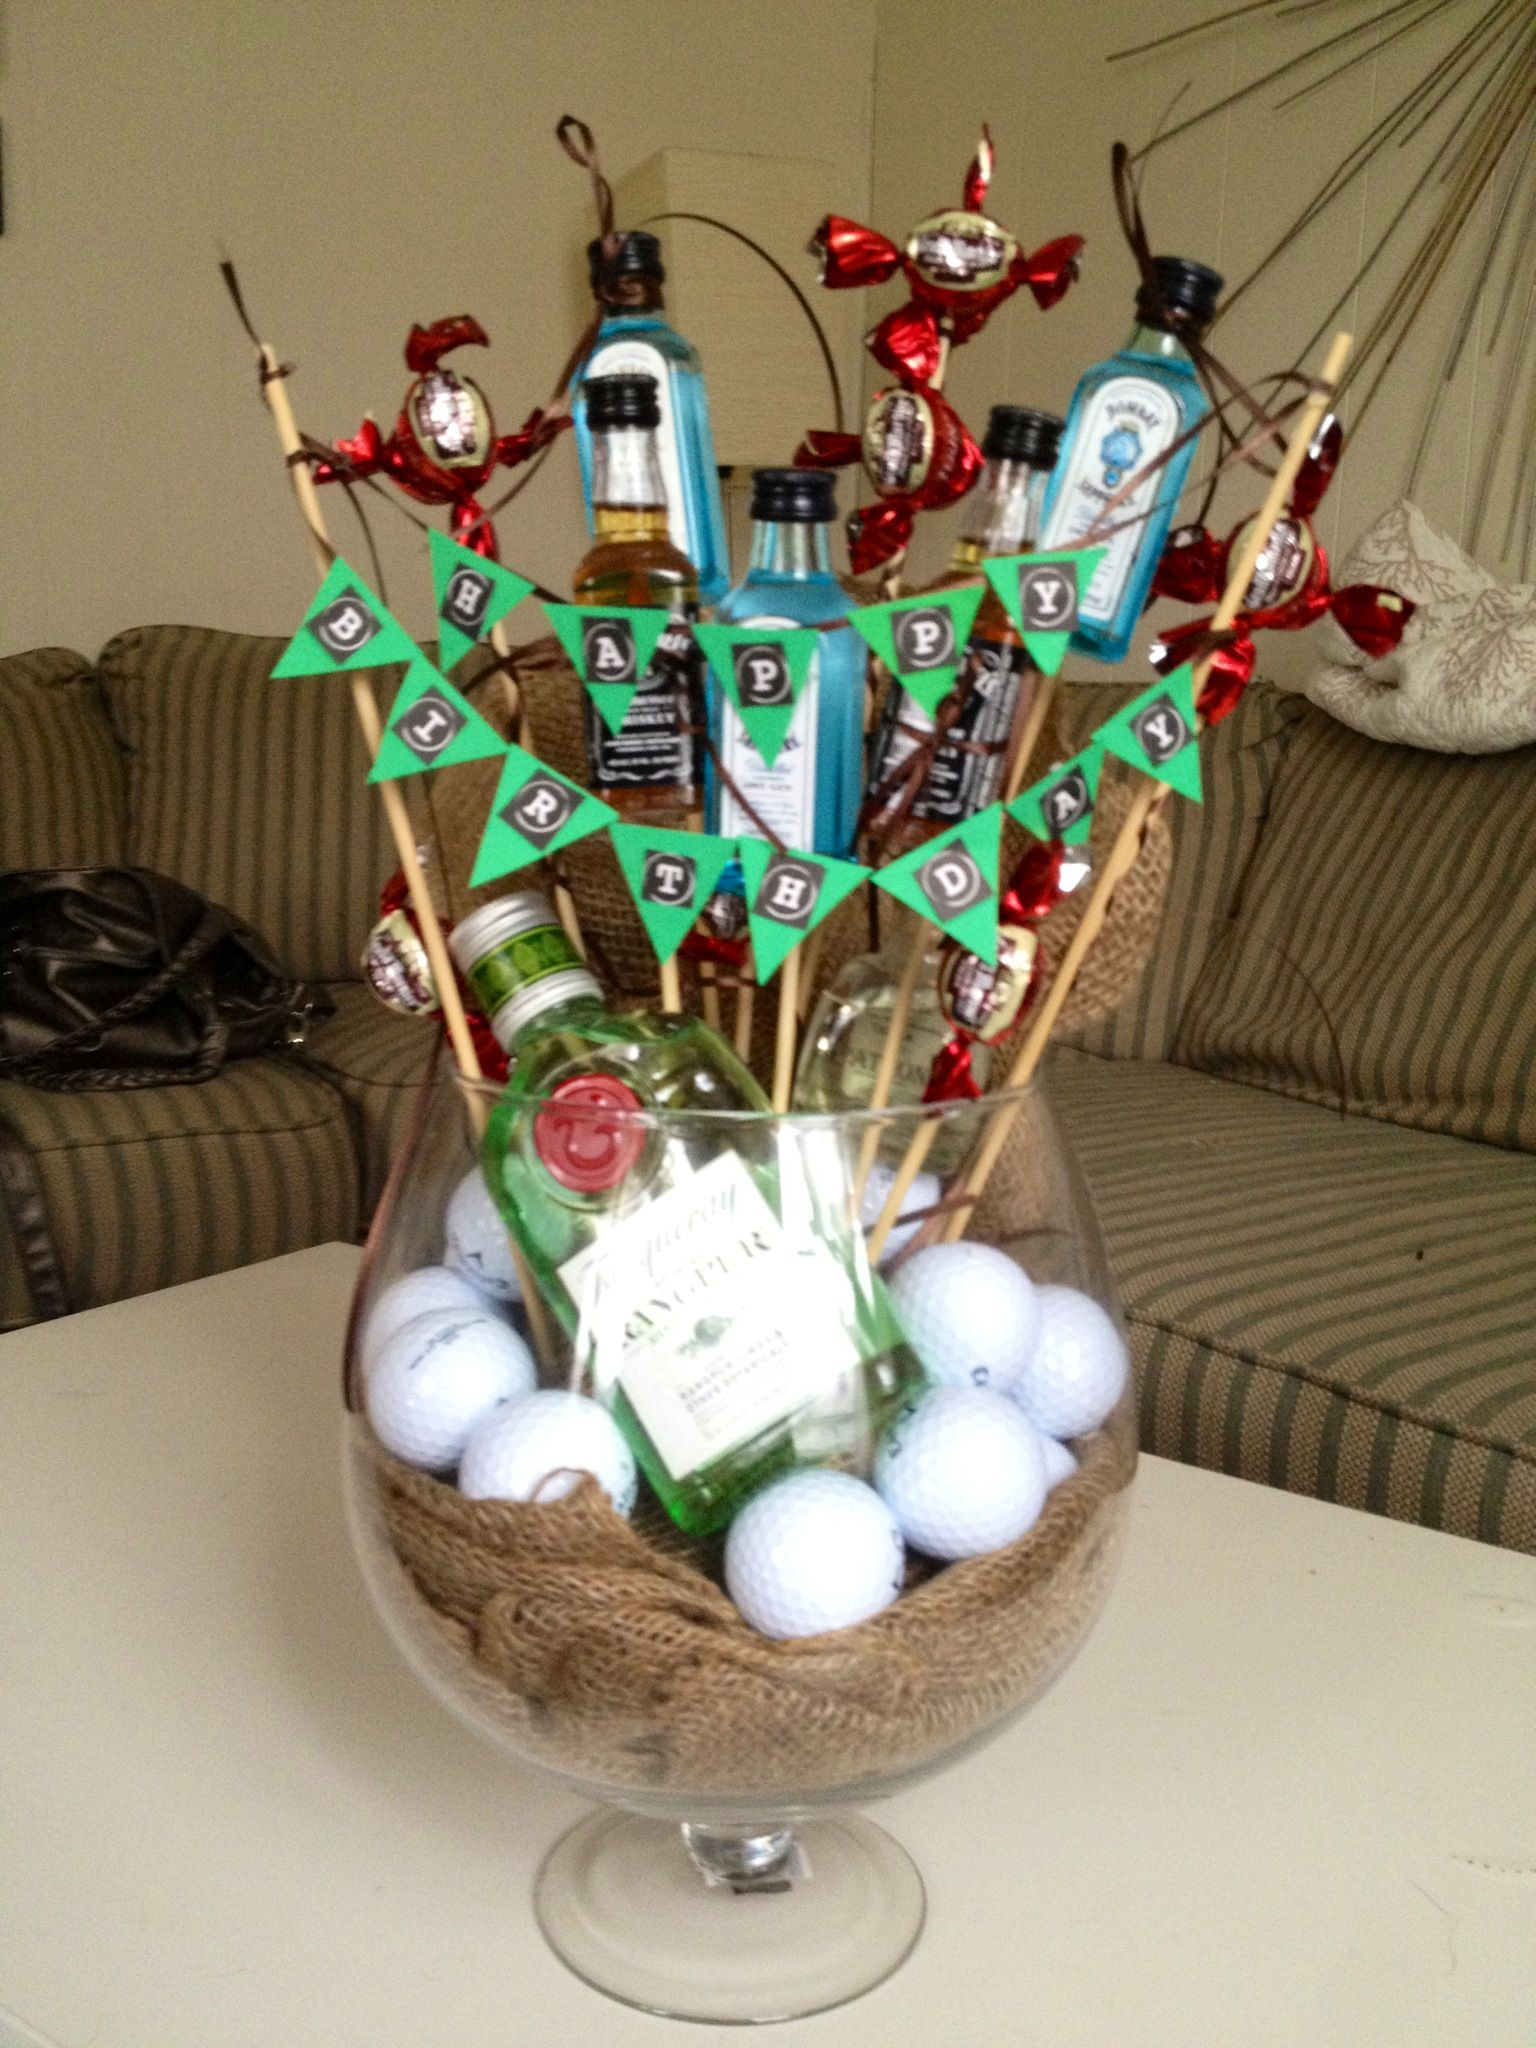 Boss Birthday Gift Ideas Male
 Man bouquet Love this is idea minus the liquor and put